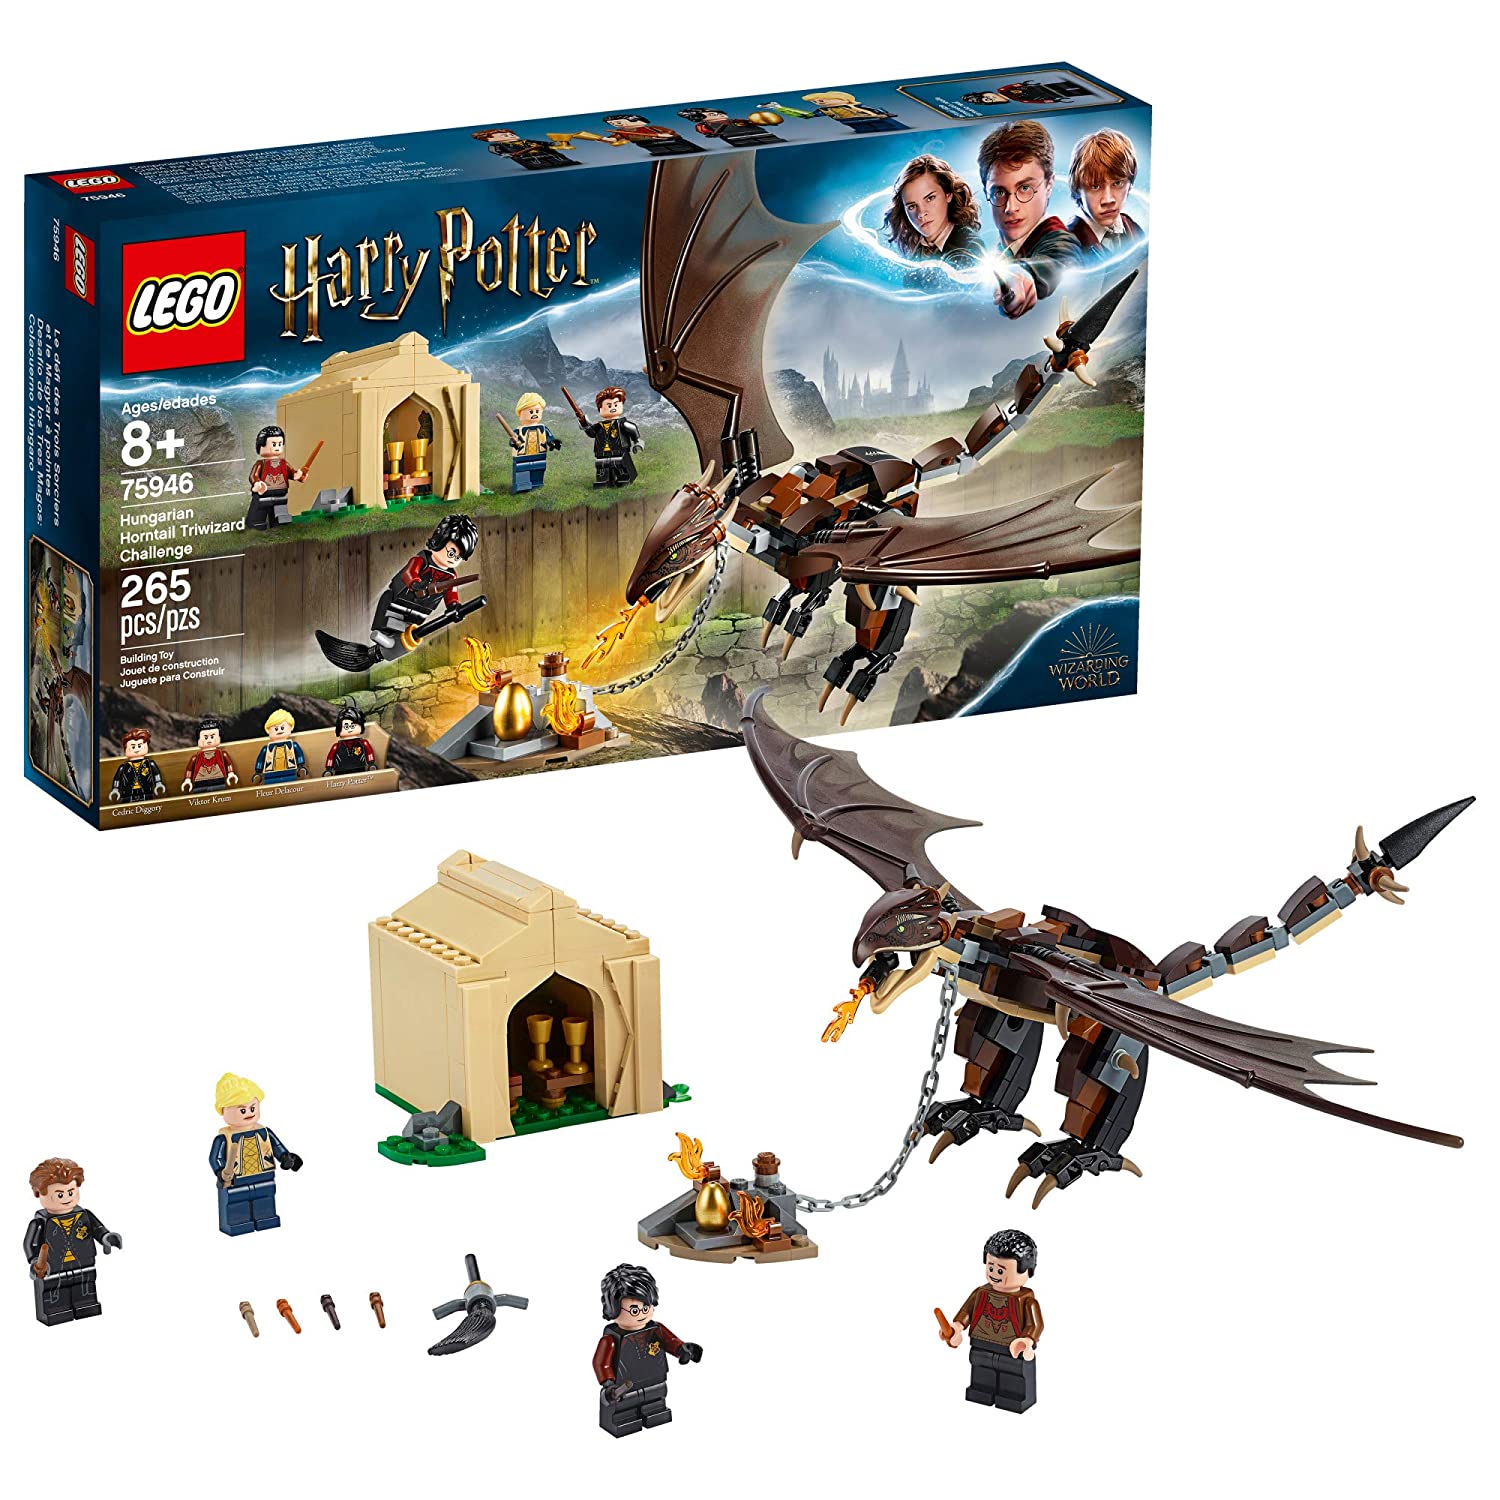 LEGO Harry Potter and The Goblet of Fire Hungarian Horntail Triwizard Challenge 75946 Building Kit, New 2019 (265 Pieces)